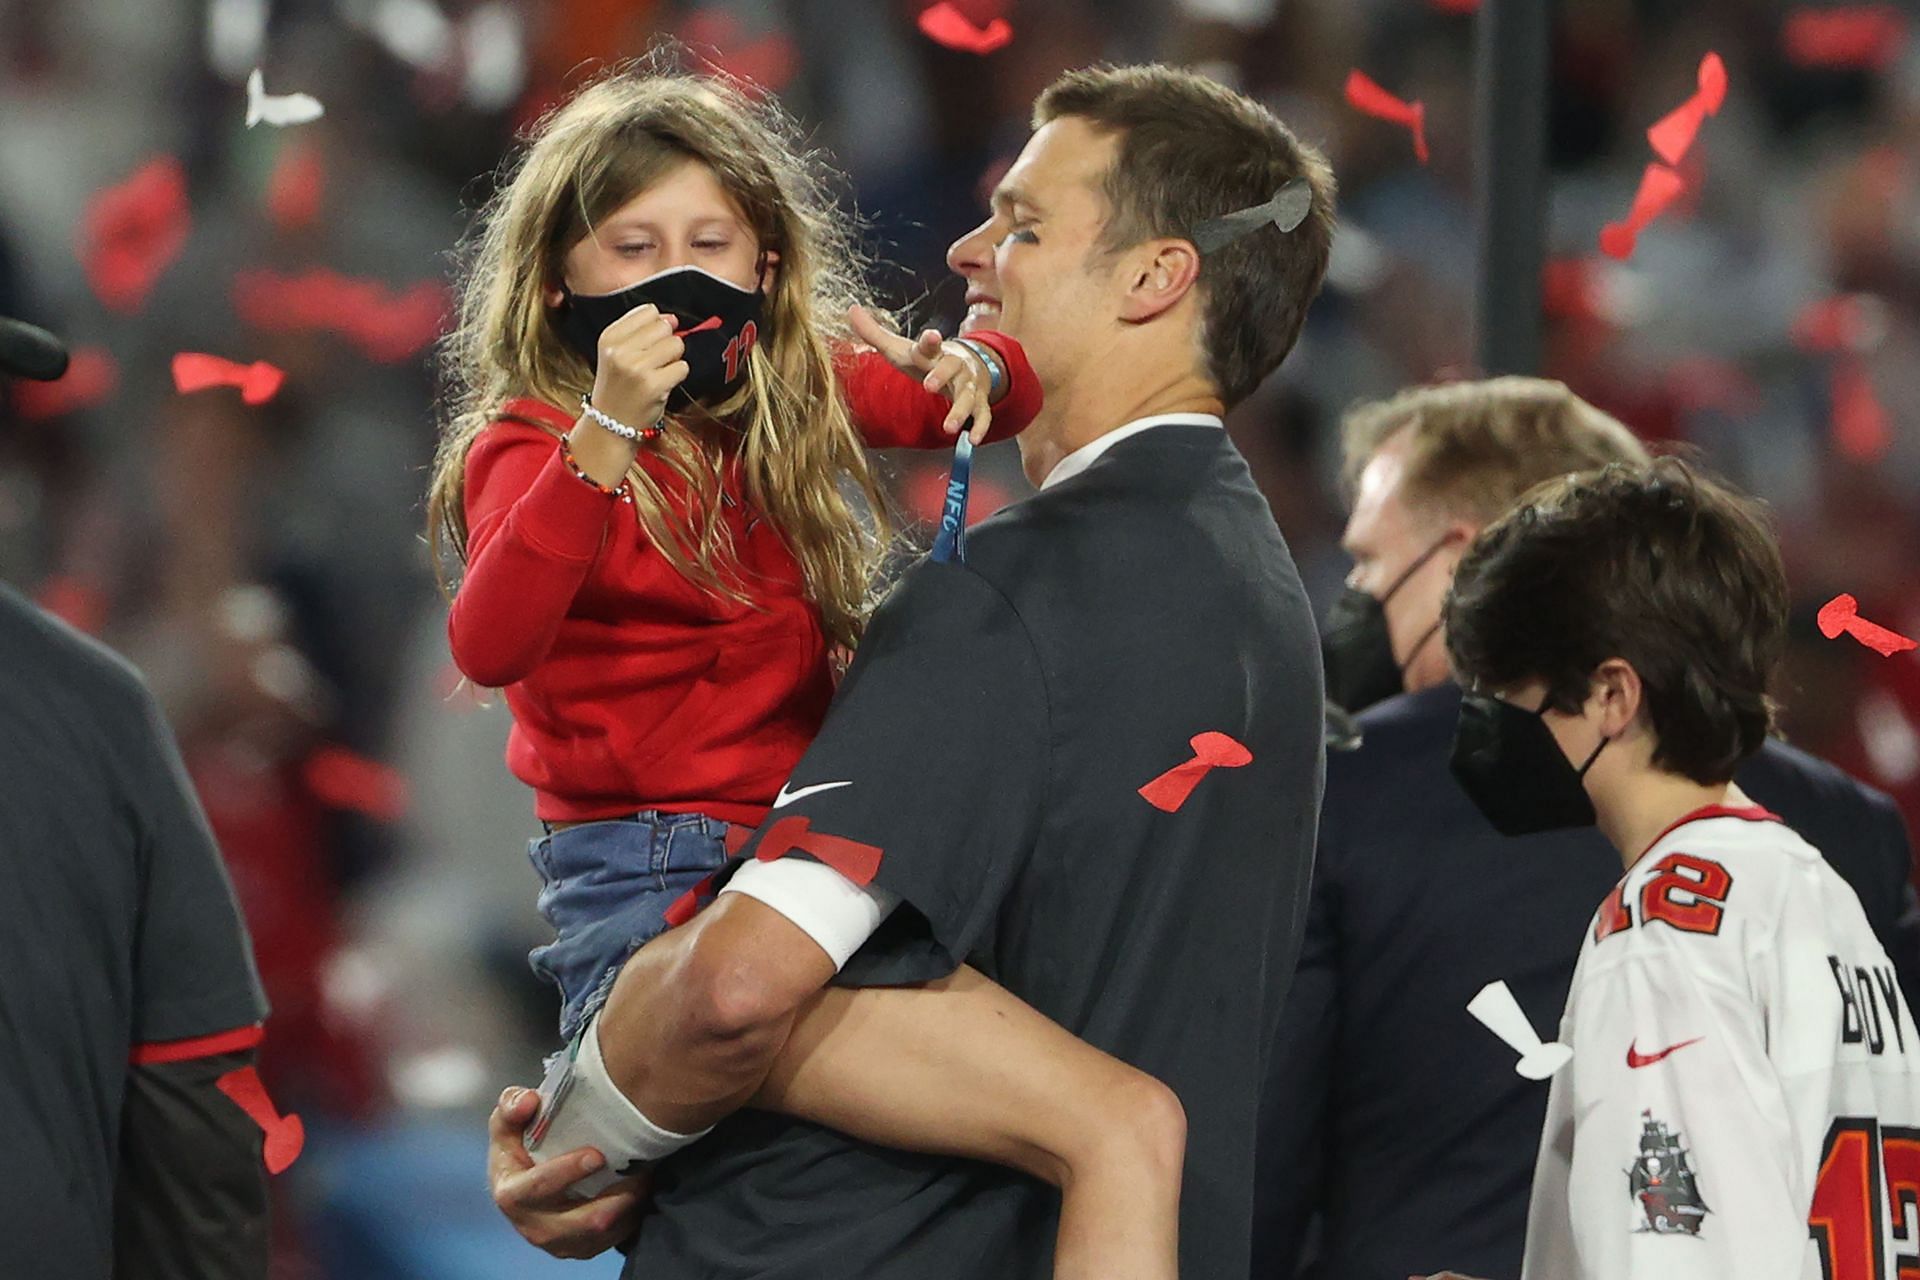 Tom Brady of the Tampa Bay Buccaneers hugs his daughter Vivian after defeating the Kansas City Chiefs 31-9 in Super Bowl LV